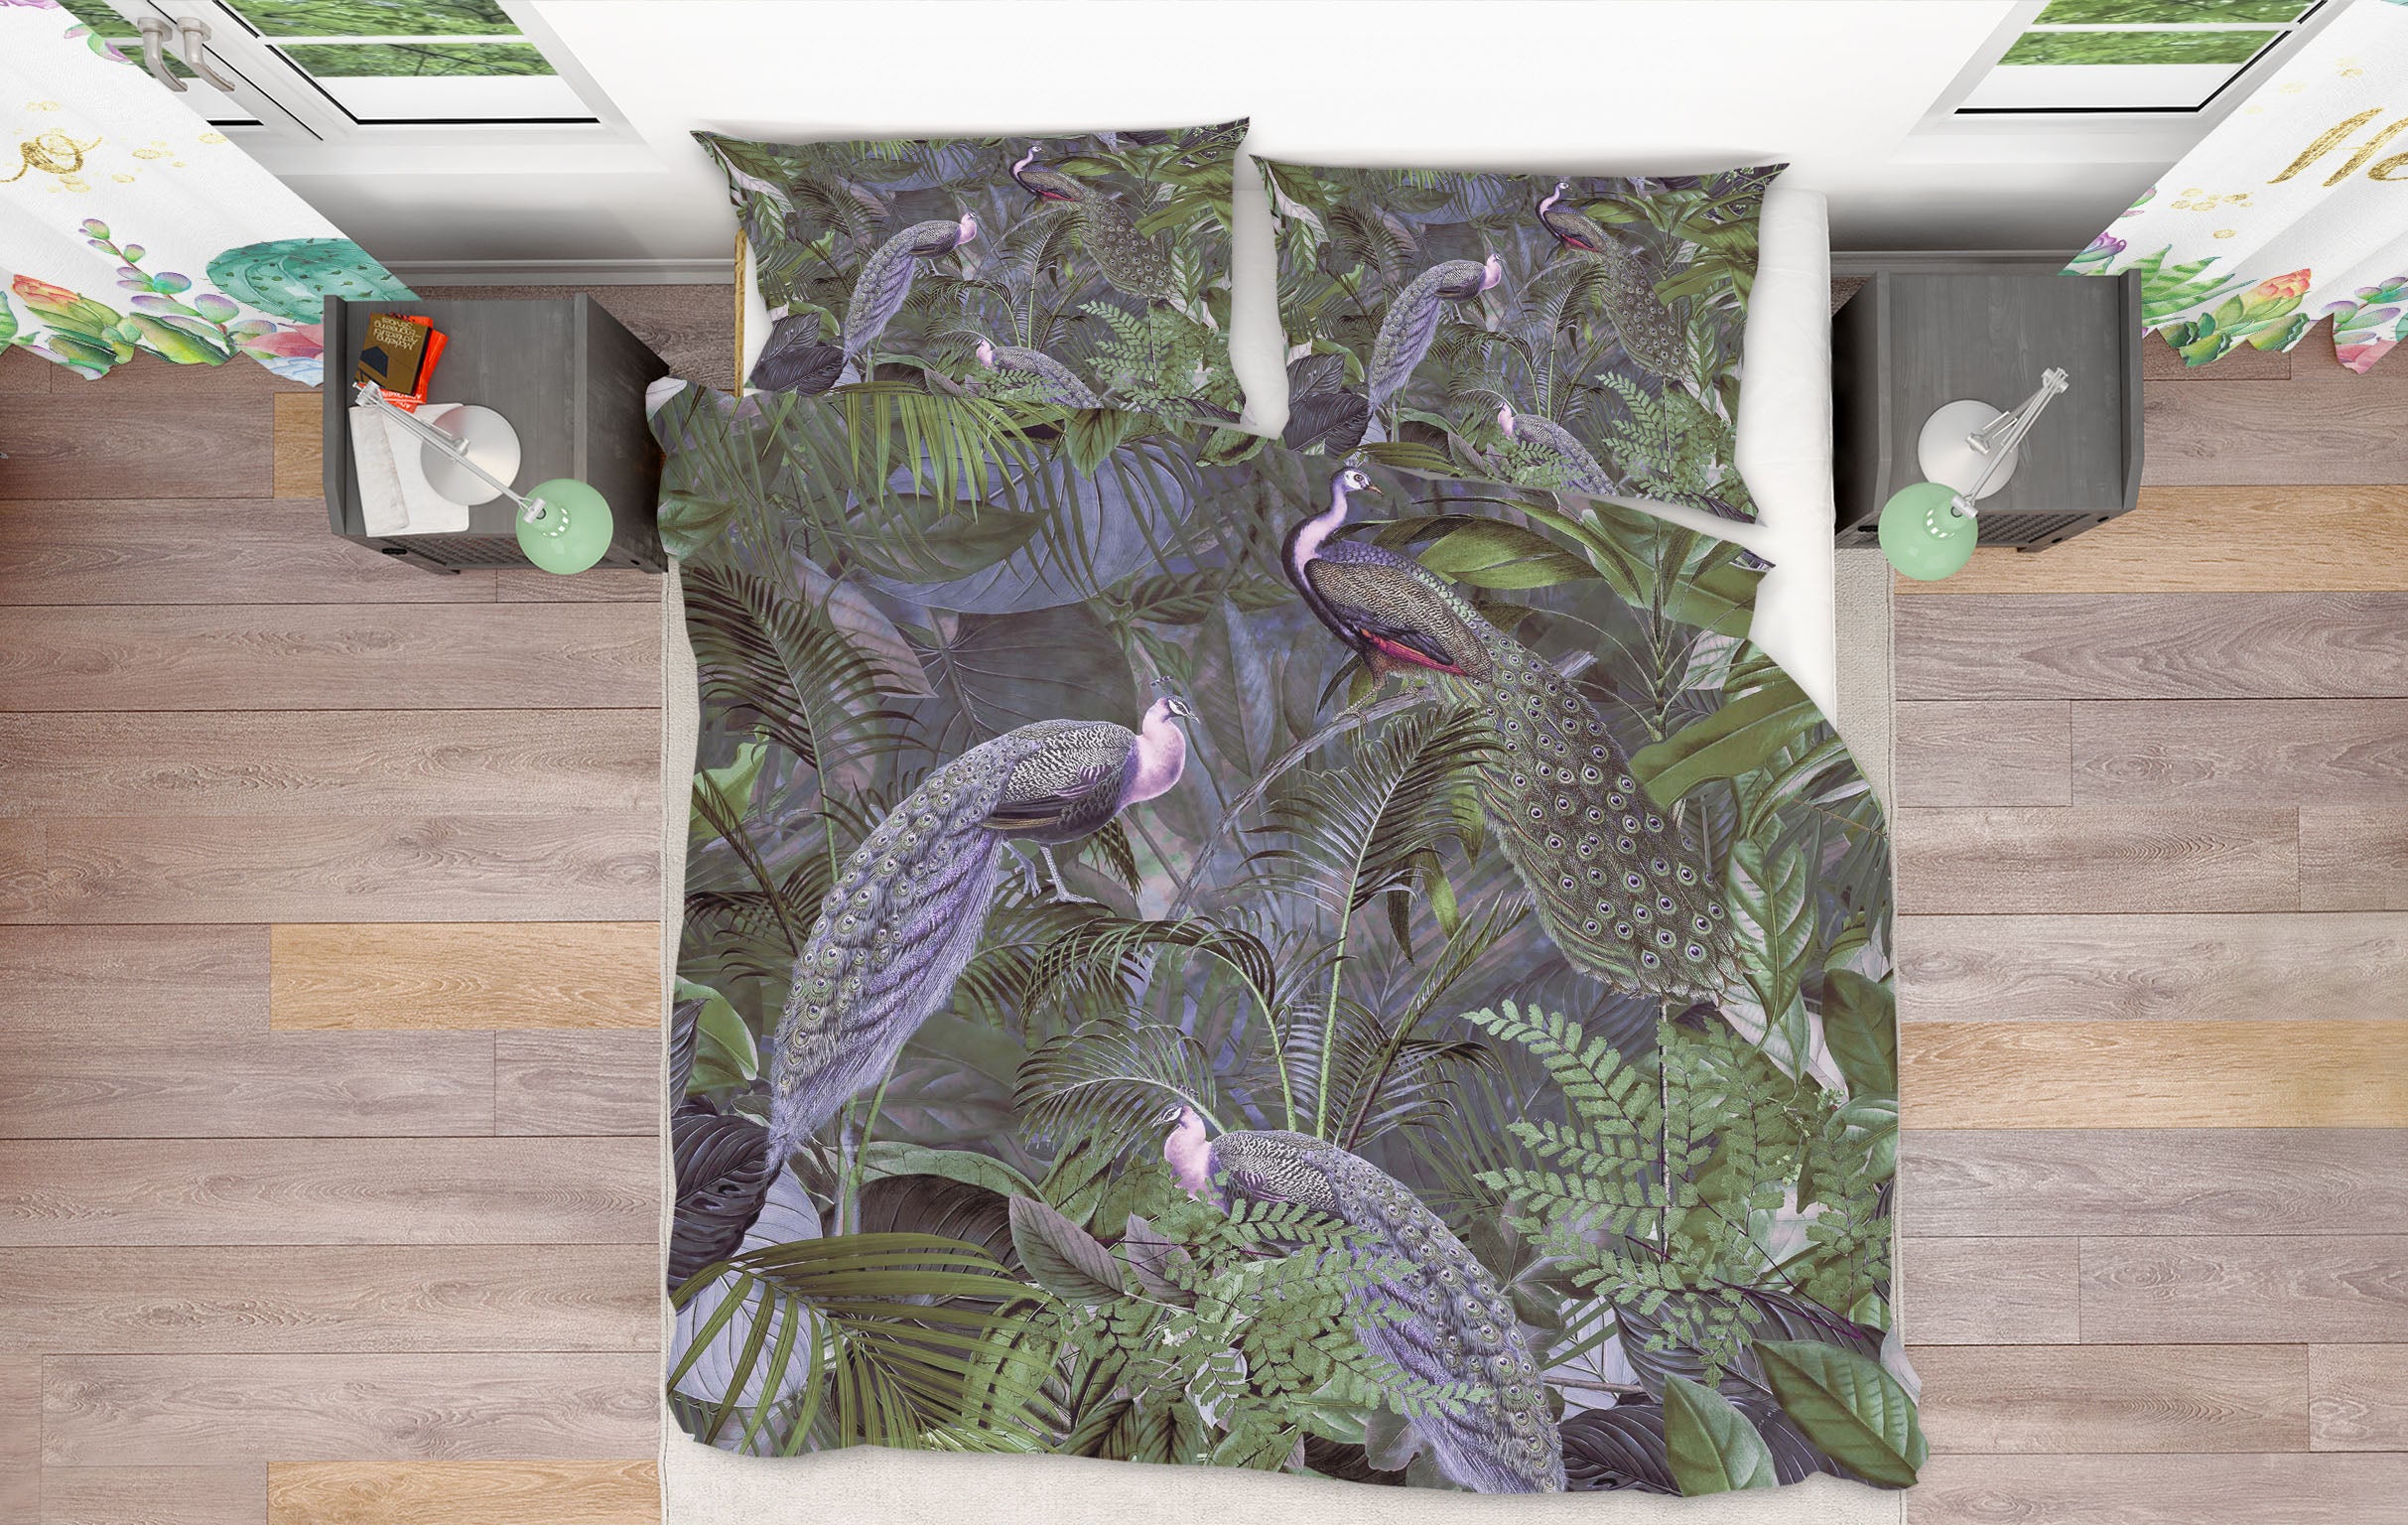 3D Peacock Playing 115 Andrea haase Bedding Bed Pillowcases Quilt